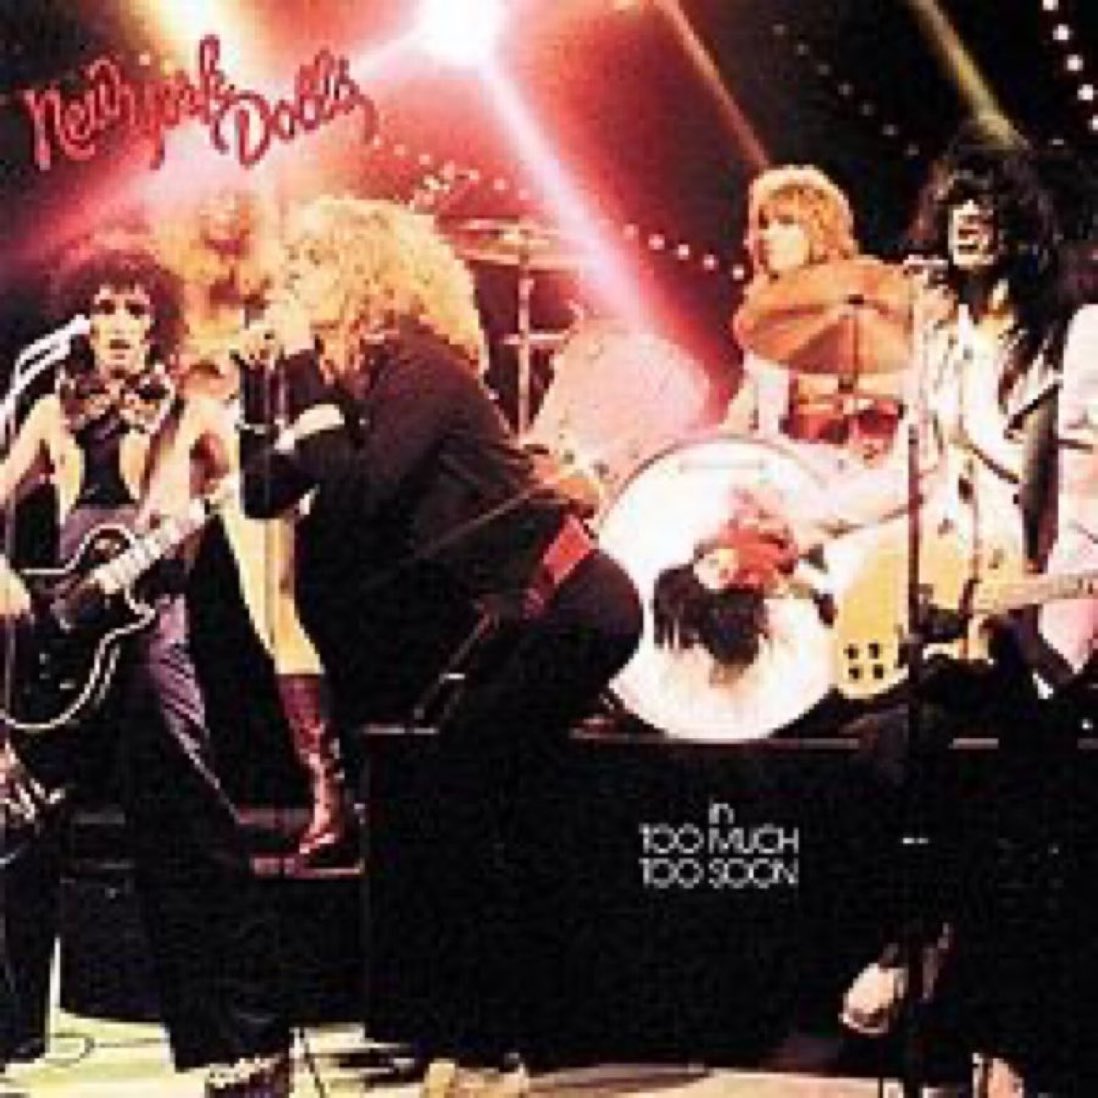 On May 10, 1974, the New York Dolls released their second studio album “Too Much Too Soon”. #NewYorkDolls